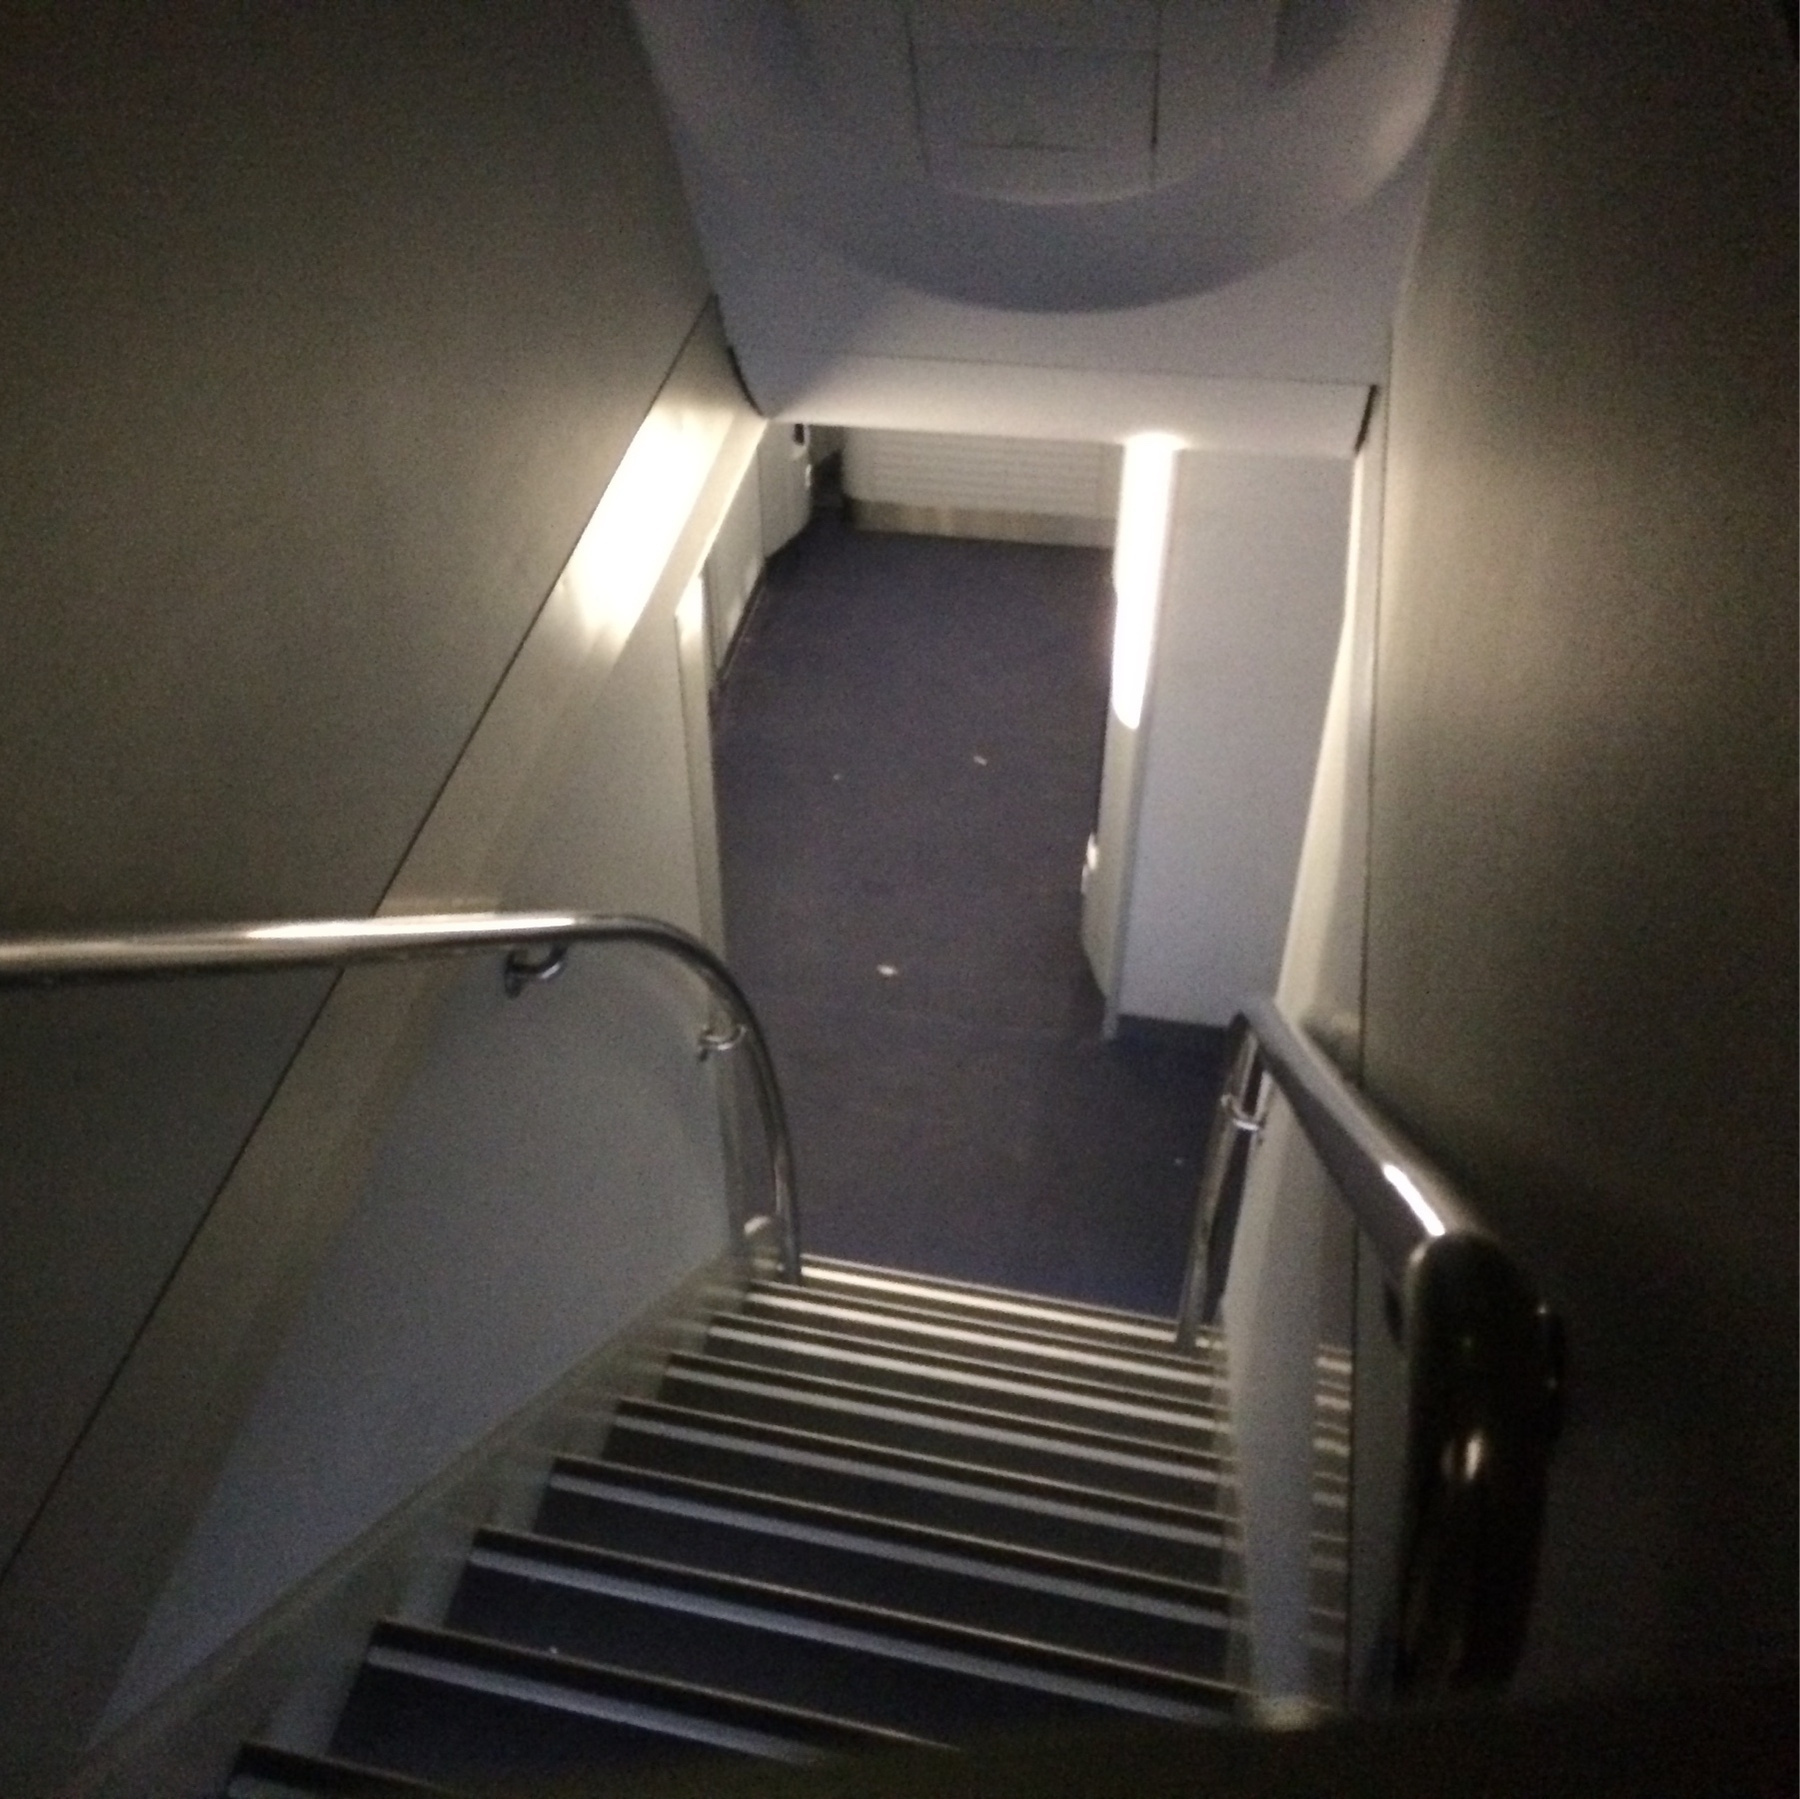 The stairs down to the lavatories & snacks